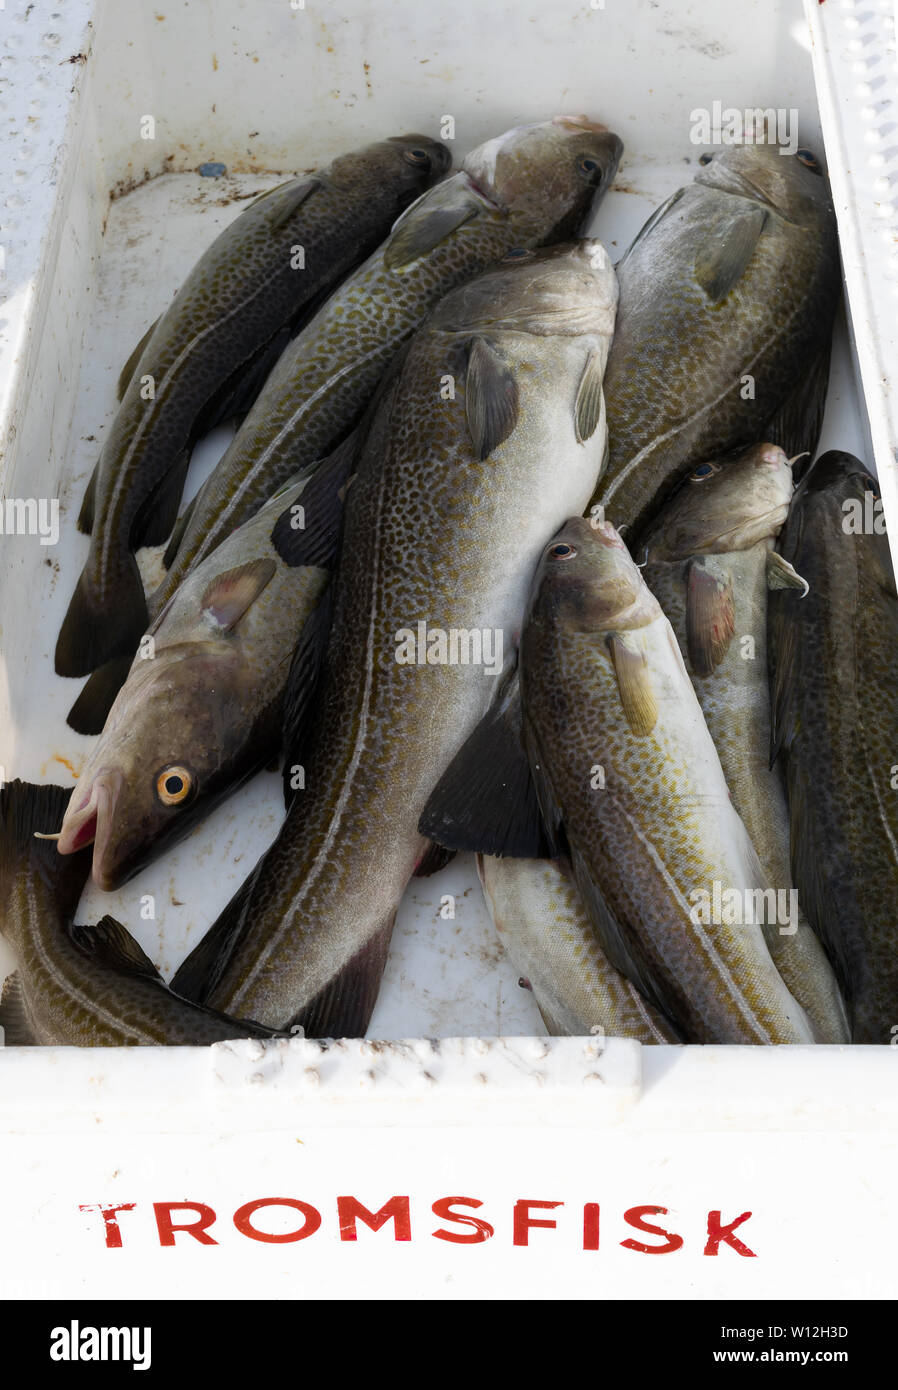 Sustainably harvested, line-caught cod from Norwegian Sea waters near Henningsvaer in the Lofoten Islands. Stock Photo